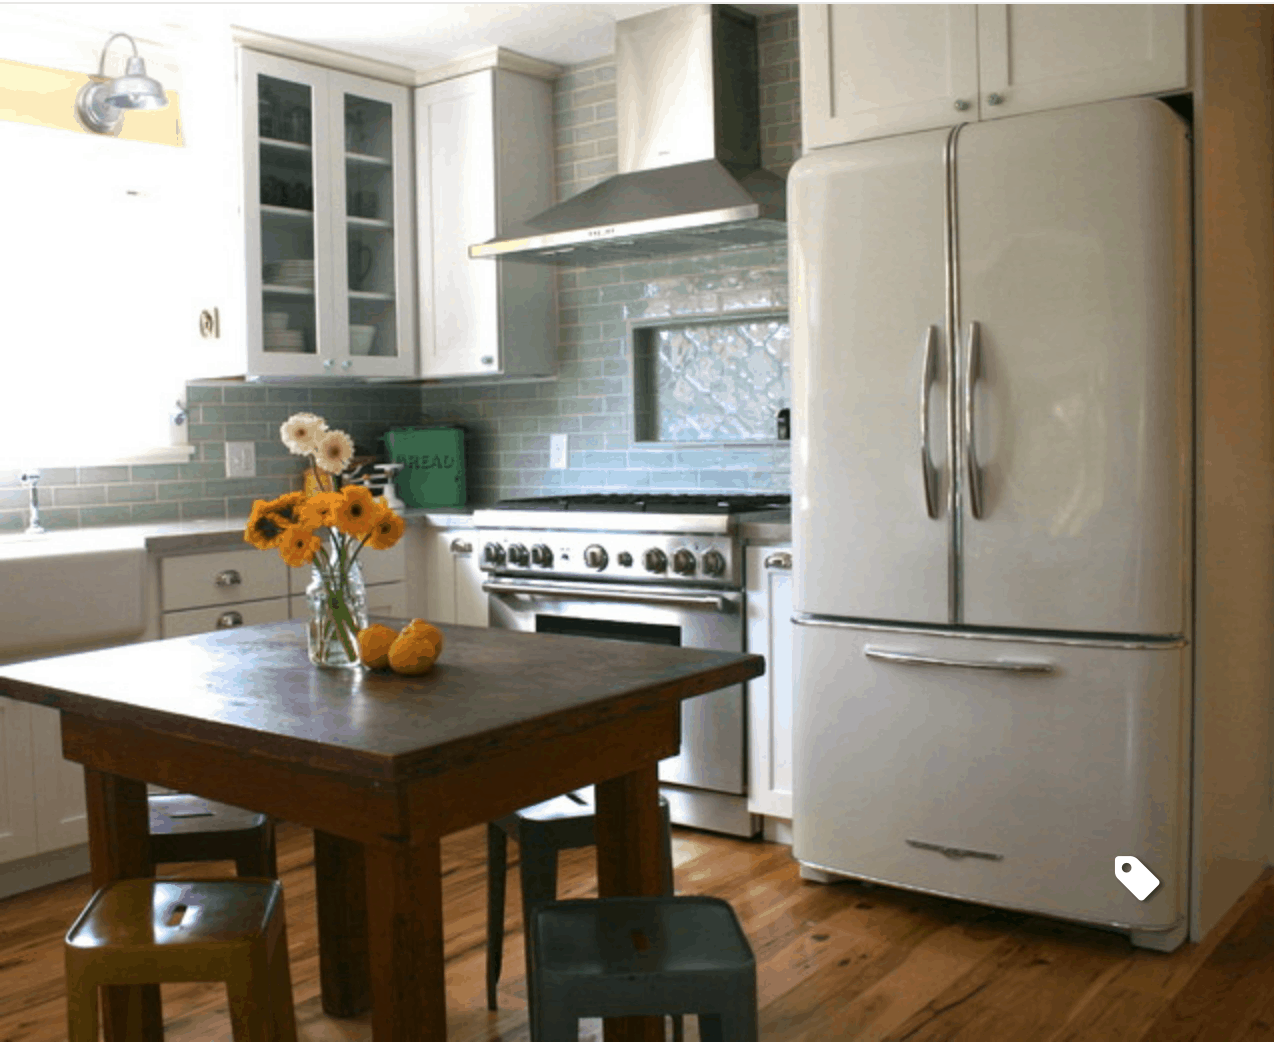 White Appliances {yes, you can} - The Inspired Room